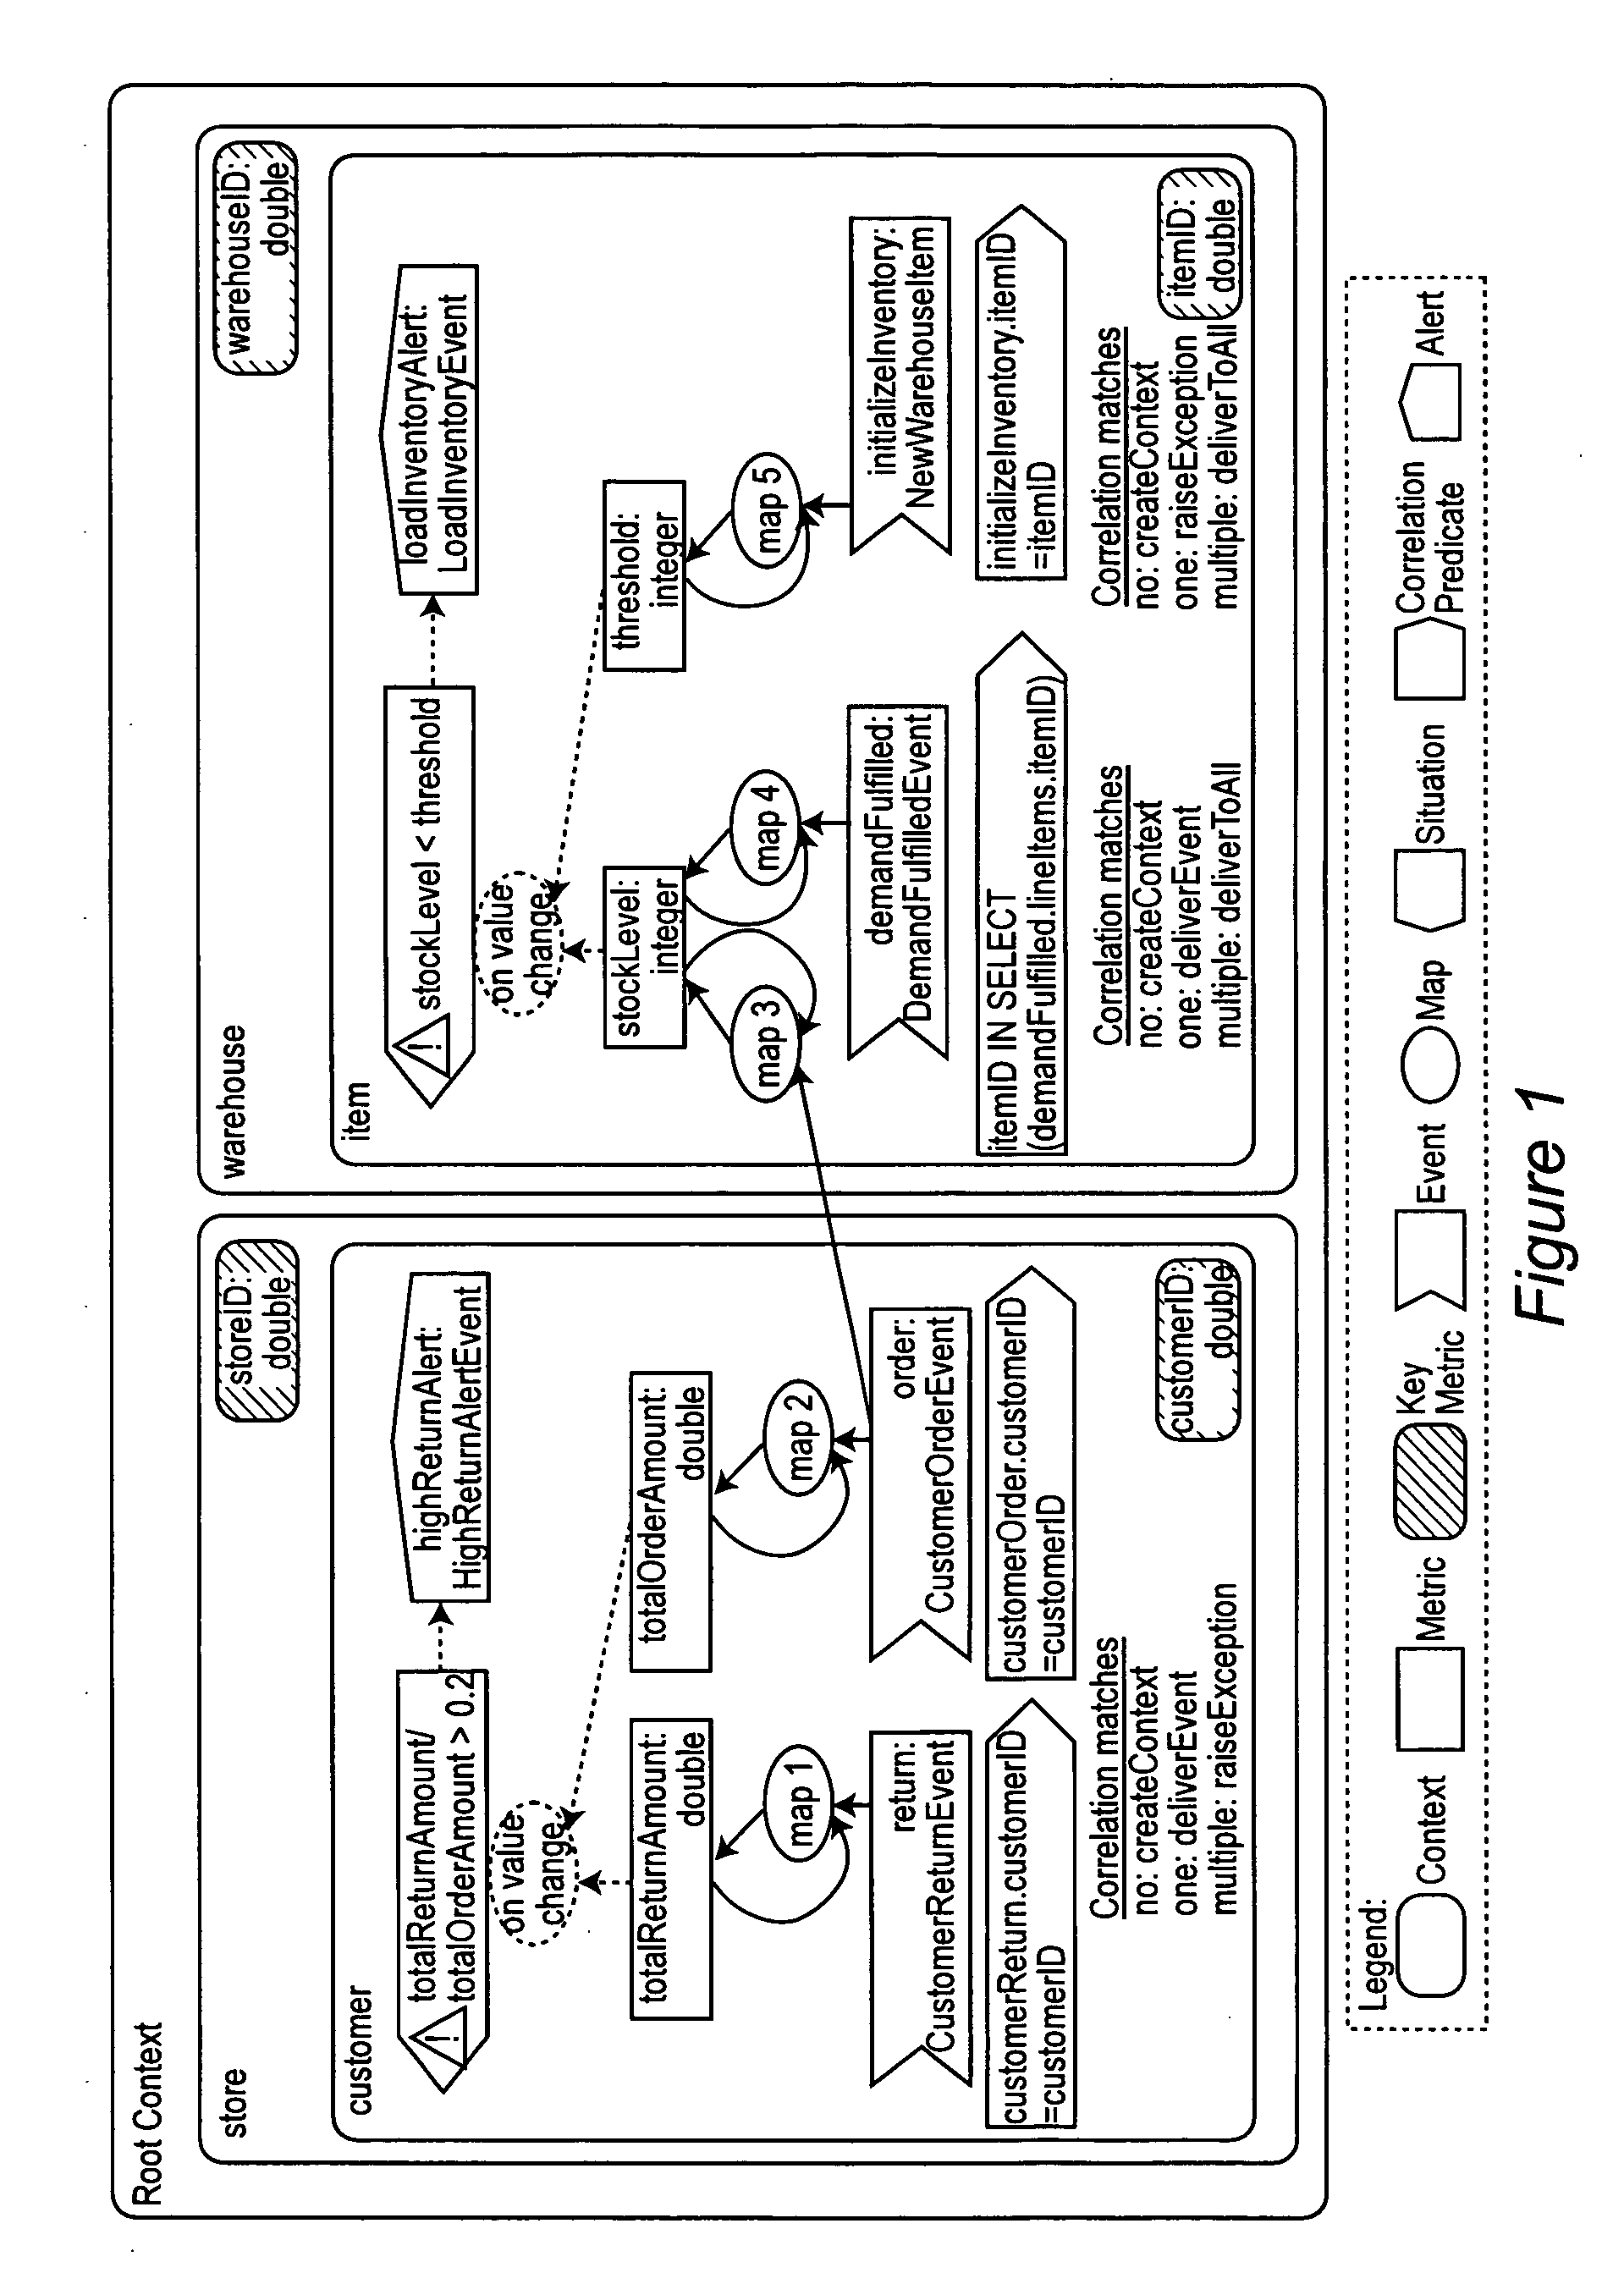 Method and apparatus for model-driven business performance management